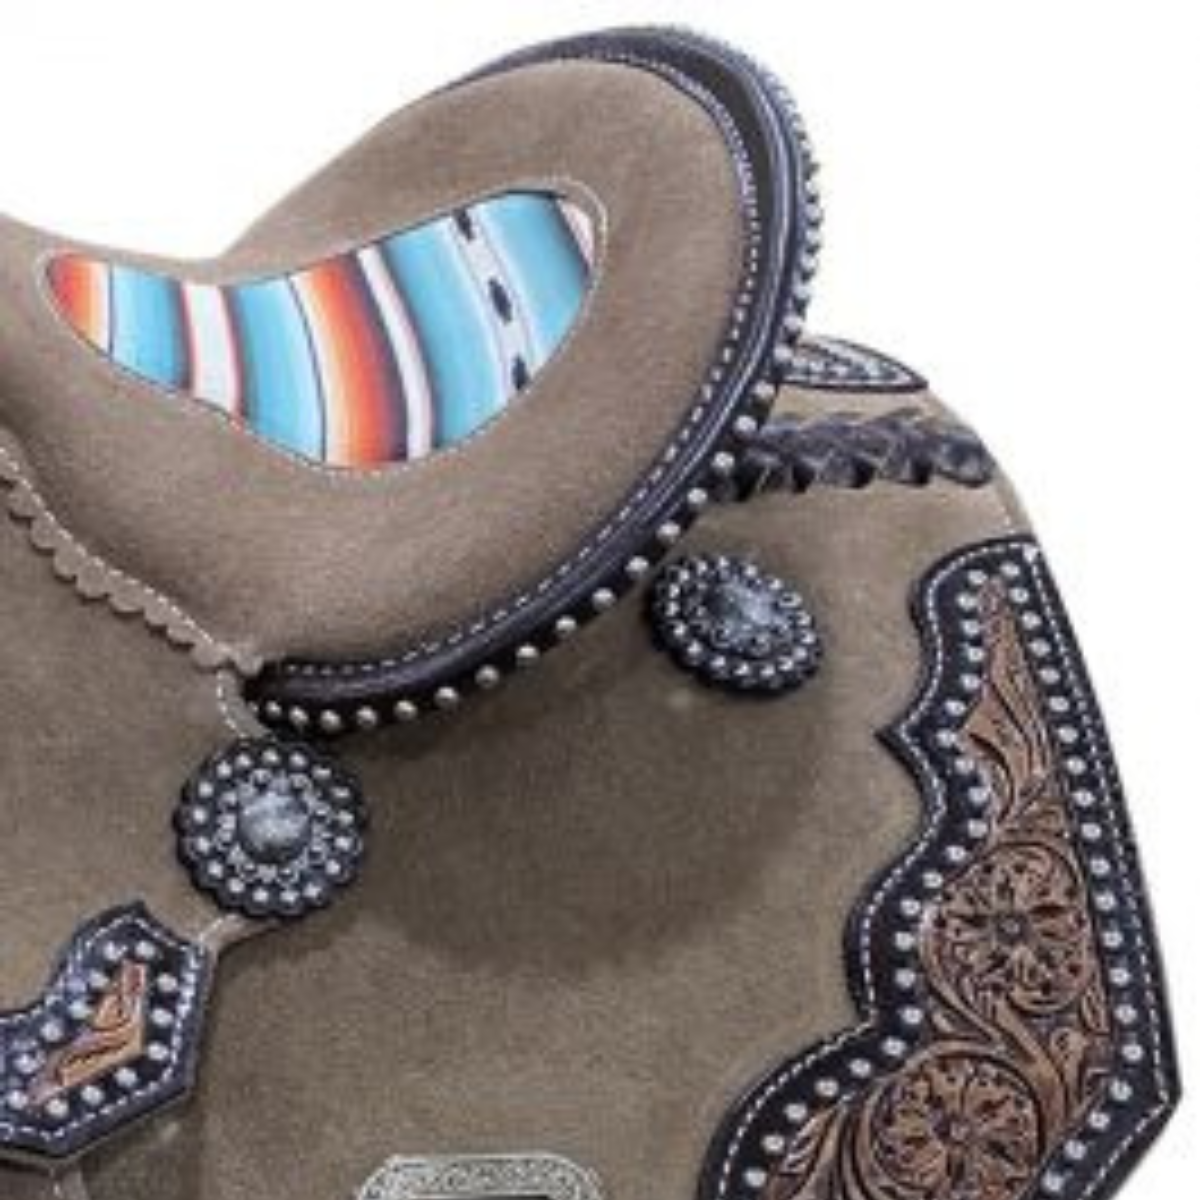 13" DOUBLE T   ROUGH OUT BARREL STYLE SADDLE WITH SOUTHWEST SERAPE PRINTED INLAY - Double T Saddles